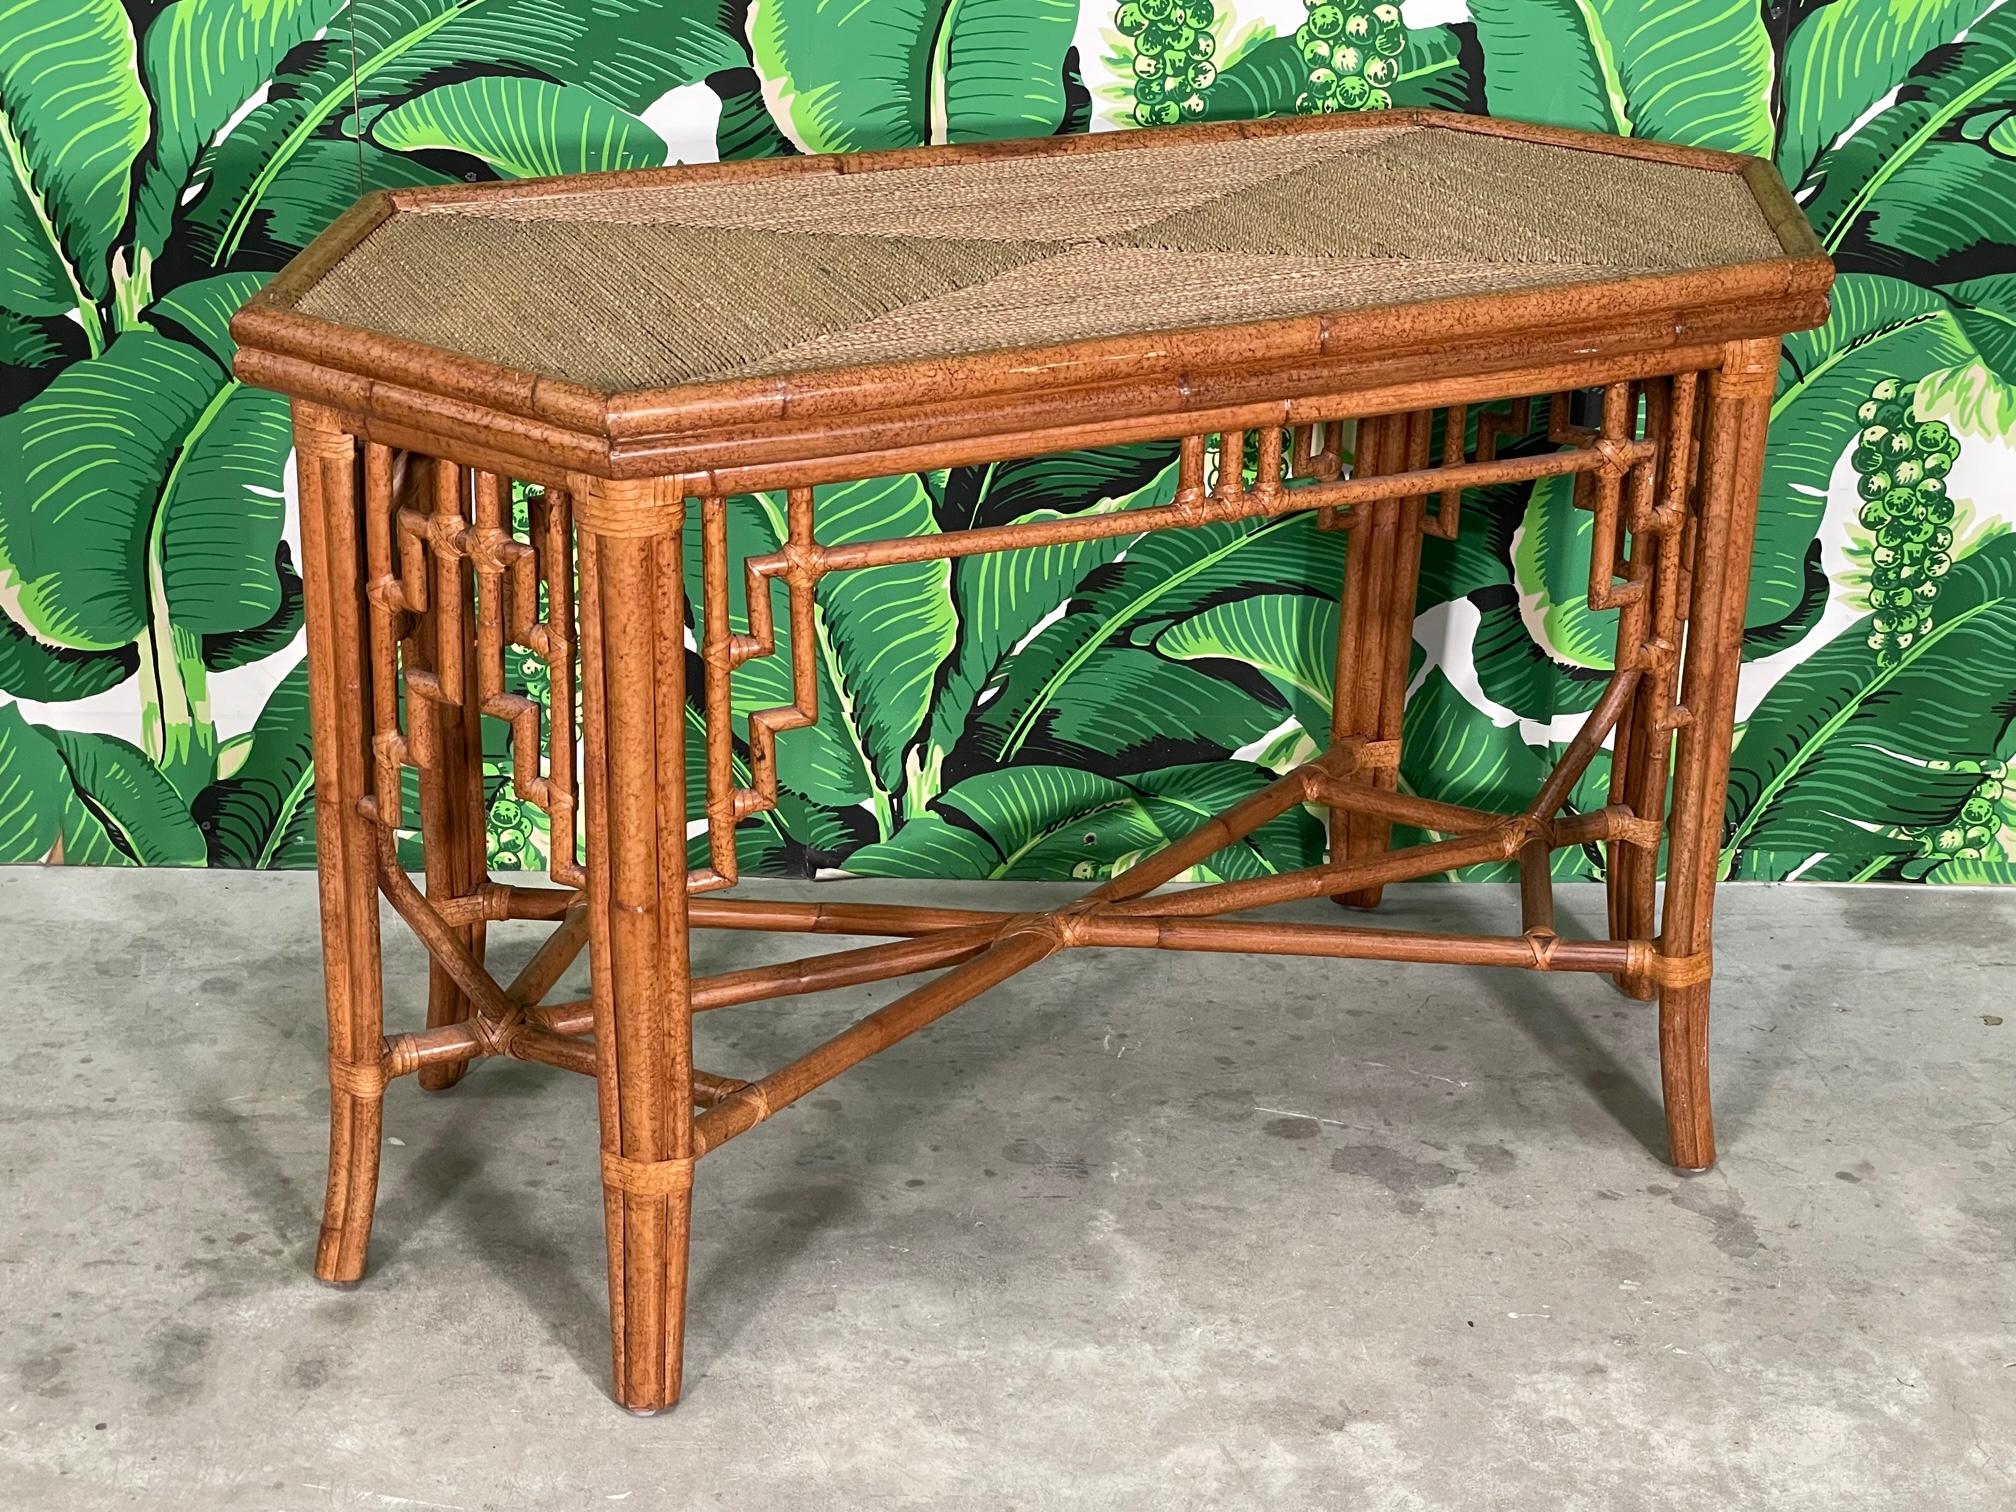 Rattan dining table base features Asian style fretwork, leather wrapped joints, and a top veneered in wicker rope. Can be used as a dining table base when a glass top is added, or as is as a console or hallway table. We have various glass tops